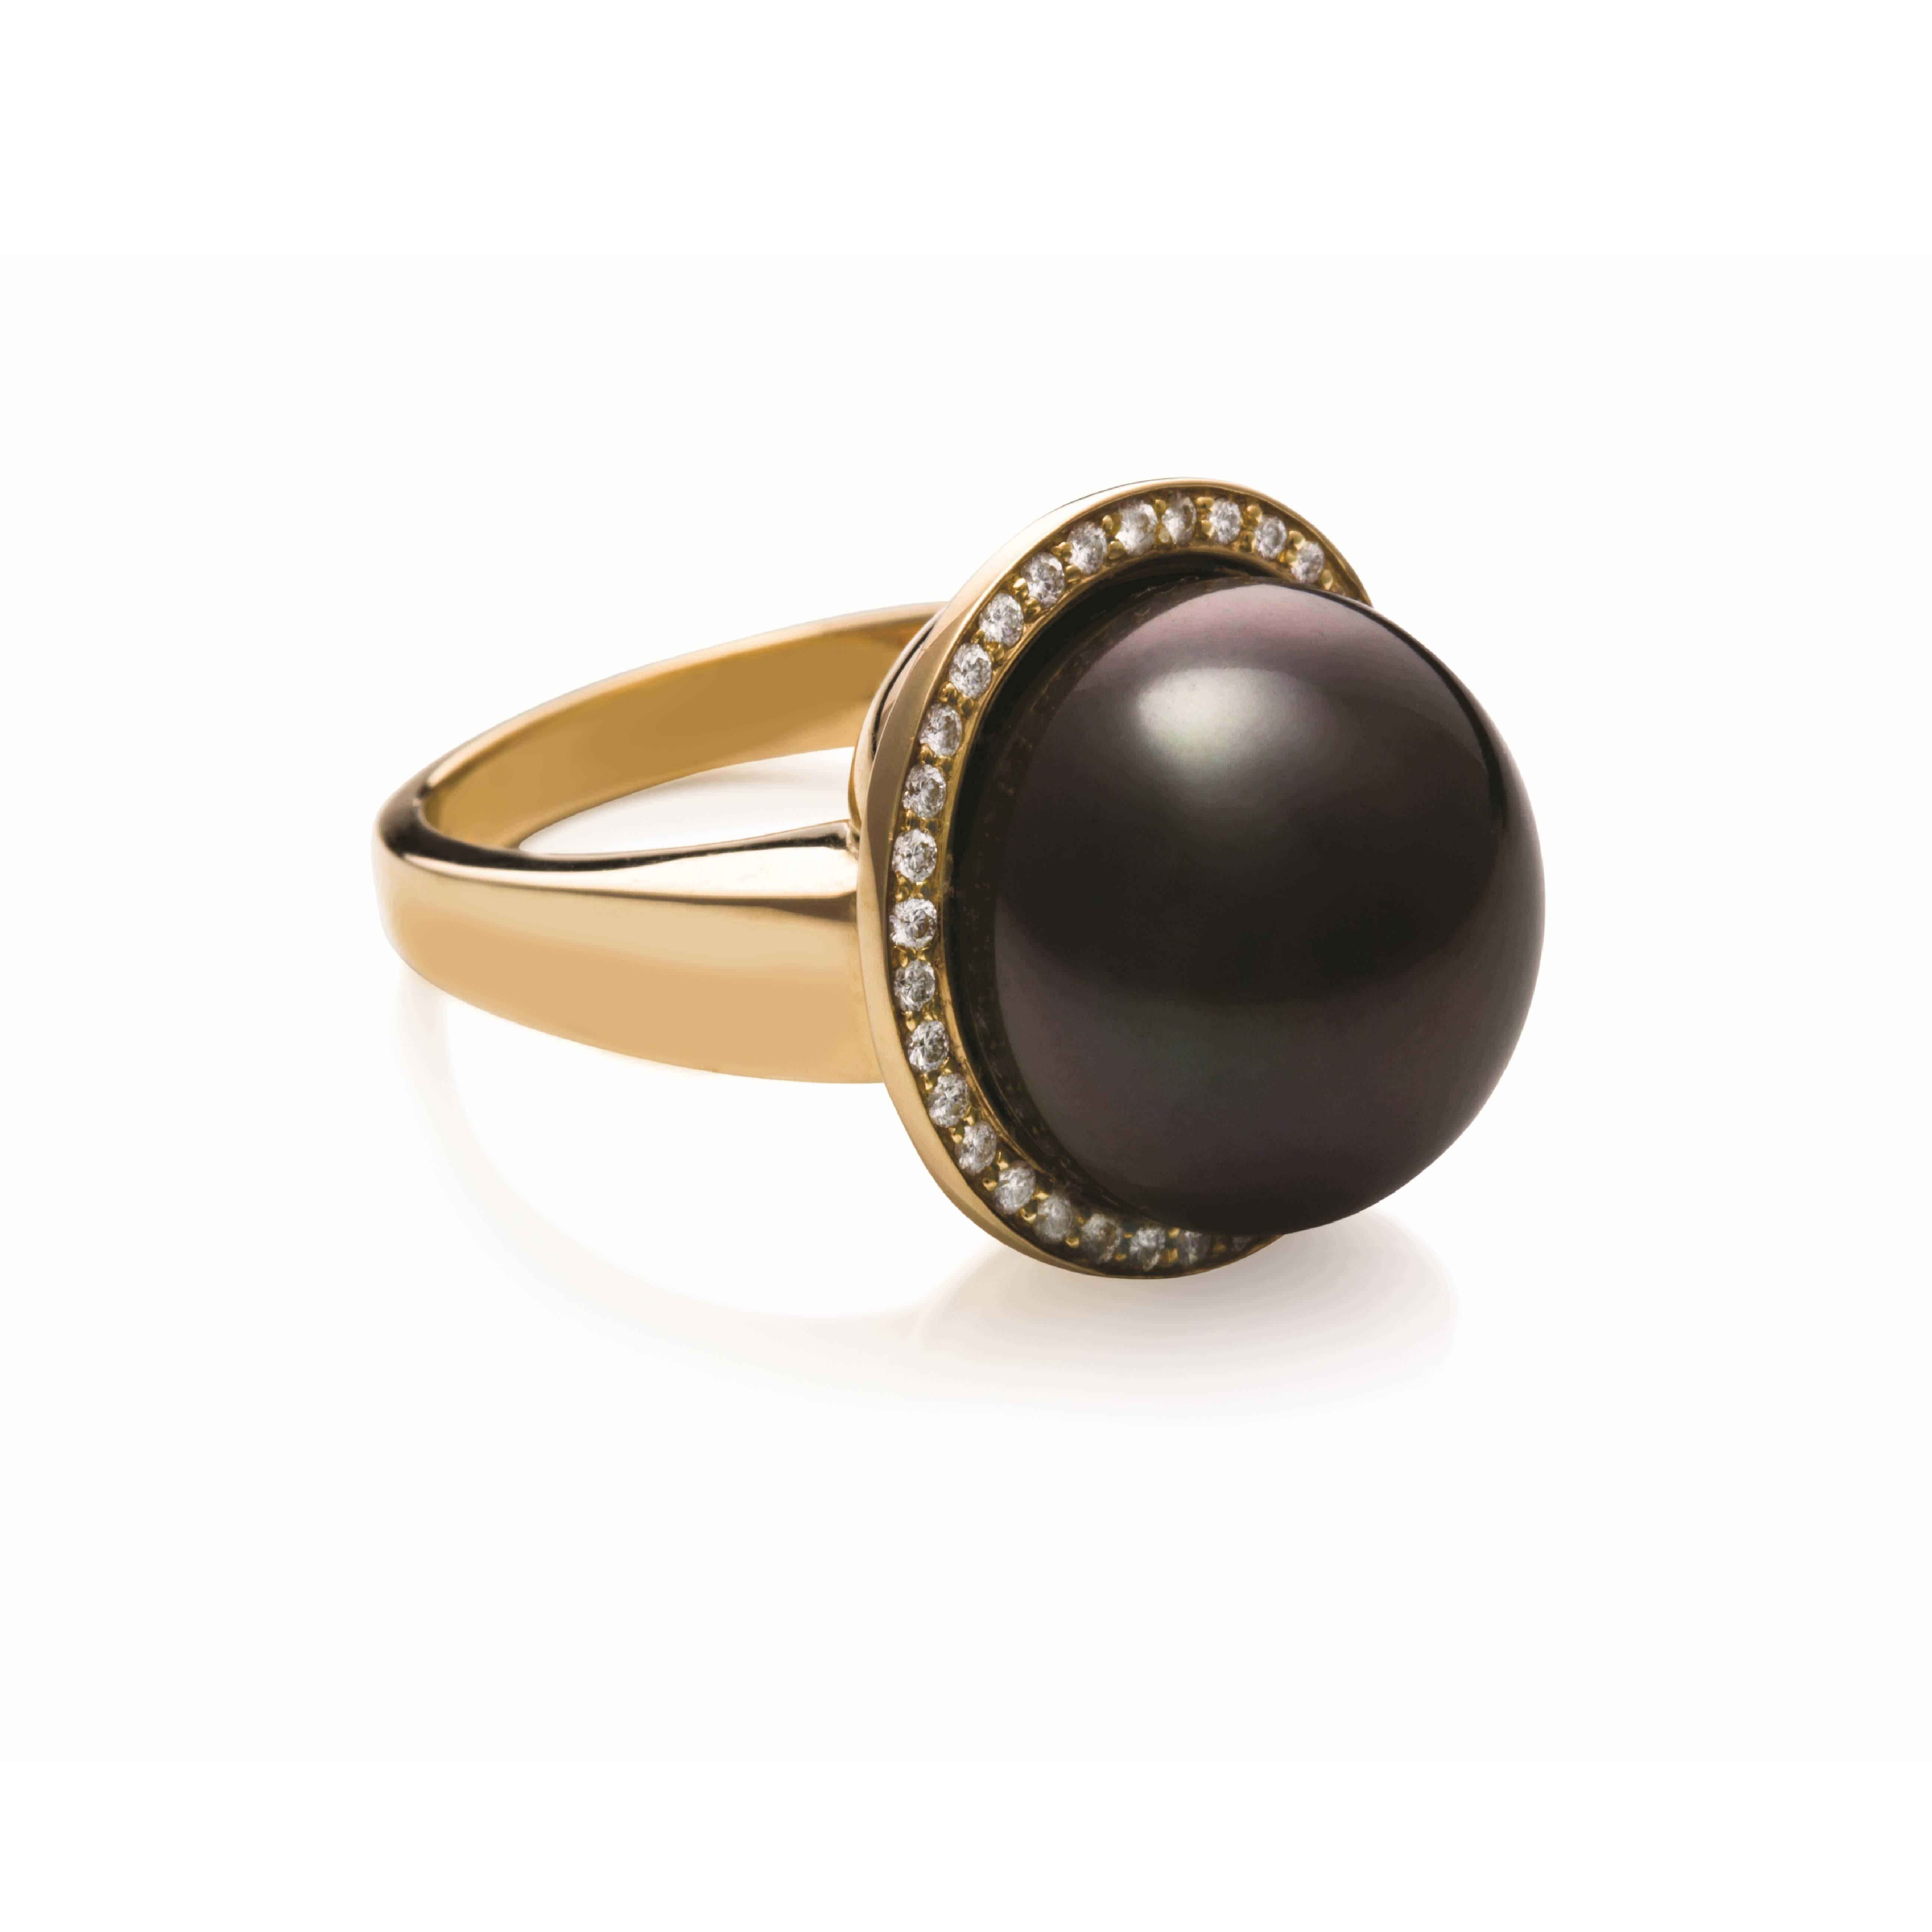 This stunning bold ring is made of 9 carat yellow gold which is encircled with 0.31ct diamonds.

The centre pearl is a 0.6 inches / 15.3mm Tahitian South Sea pearl, near round in shape, stunning strong colour with clear surface with a strong even